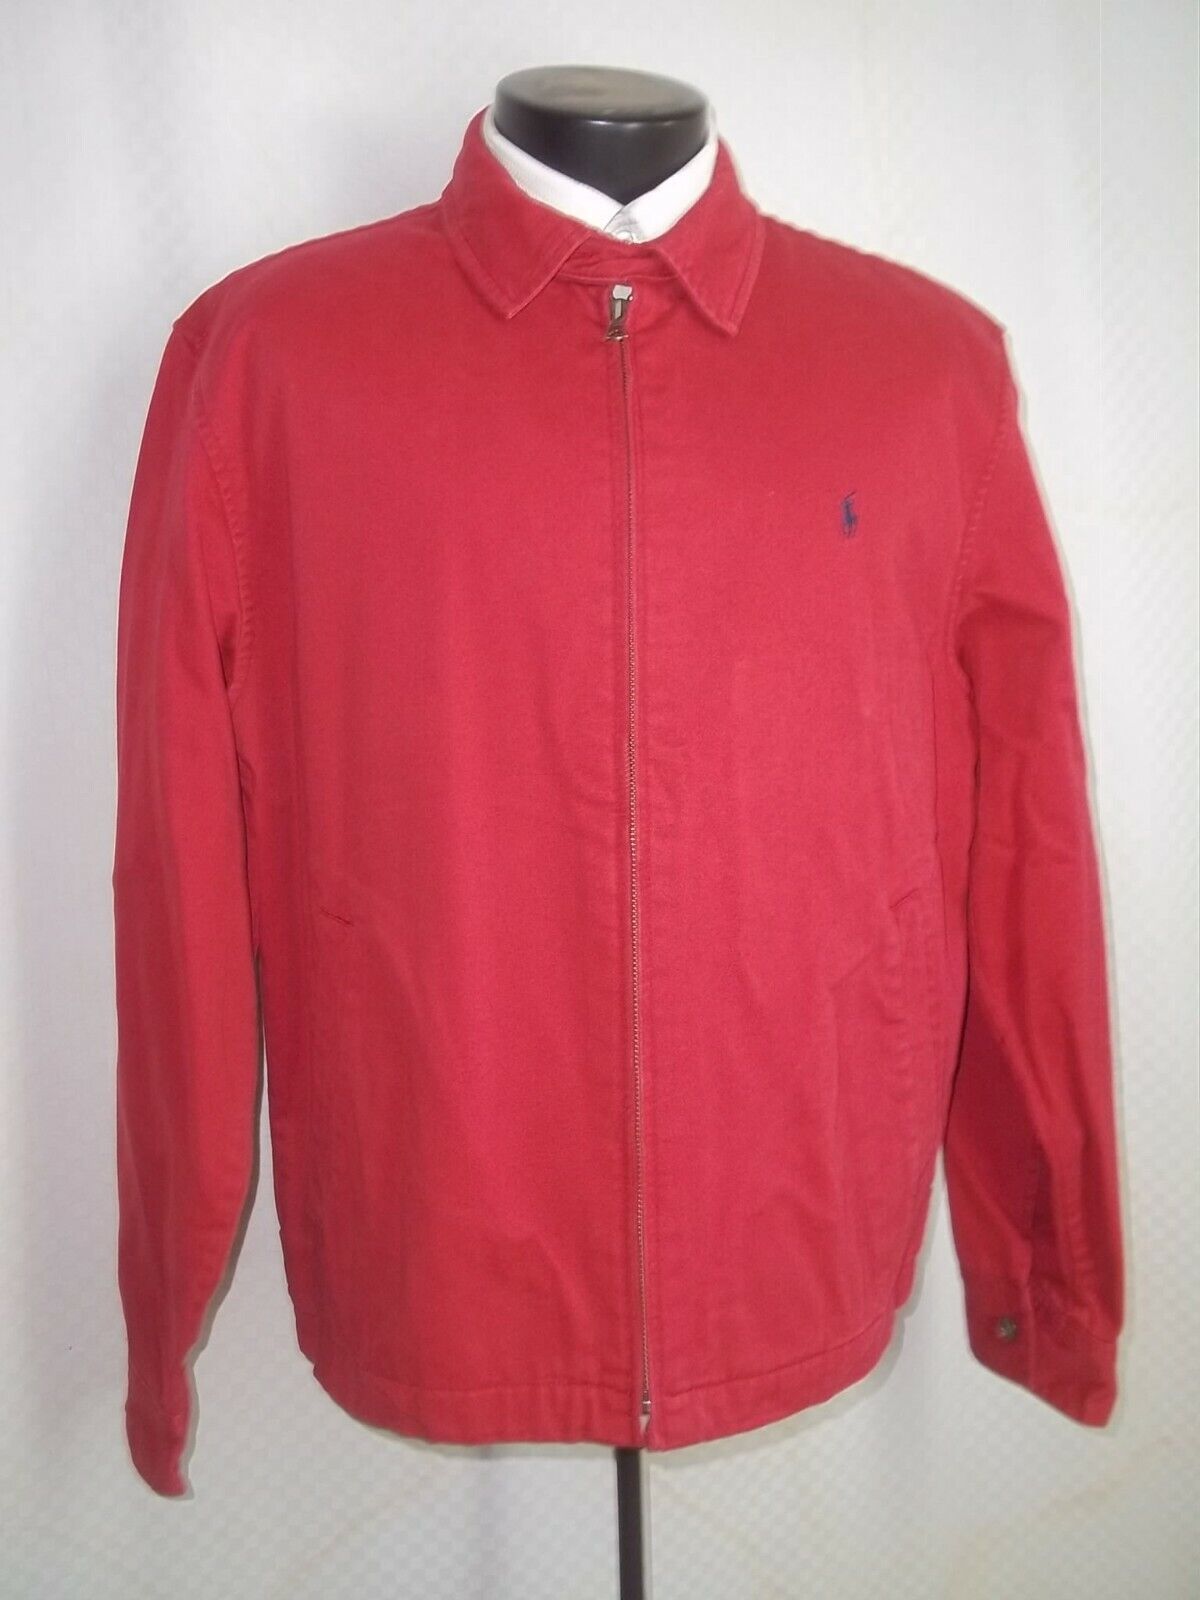 Polo Ralph Lauren Solid Red Zipper Front Cotton S… - image 2